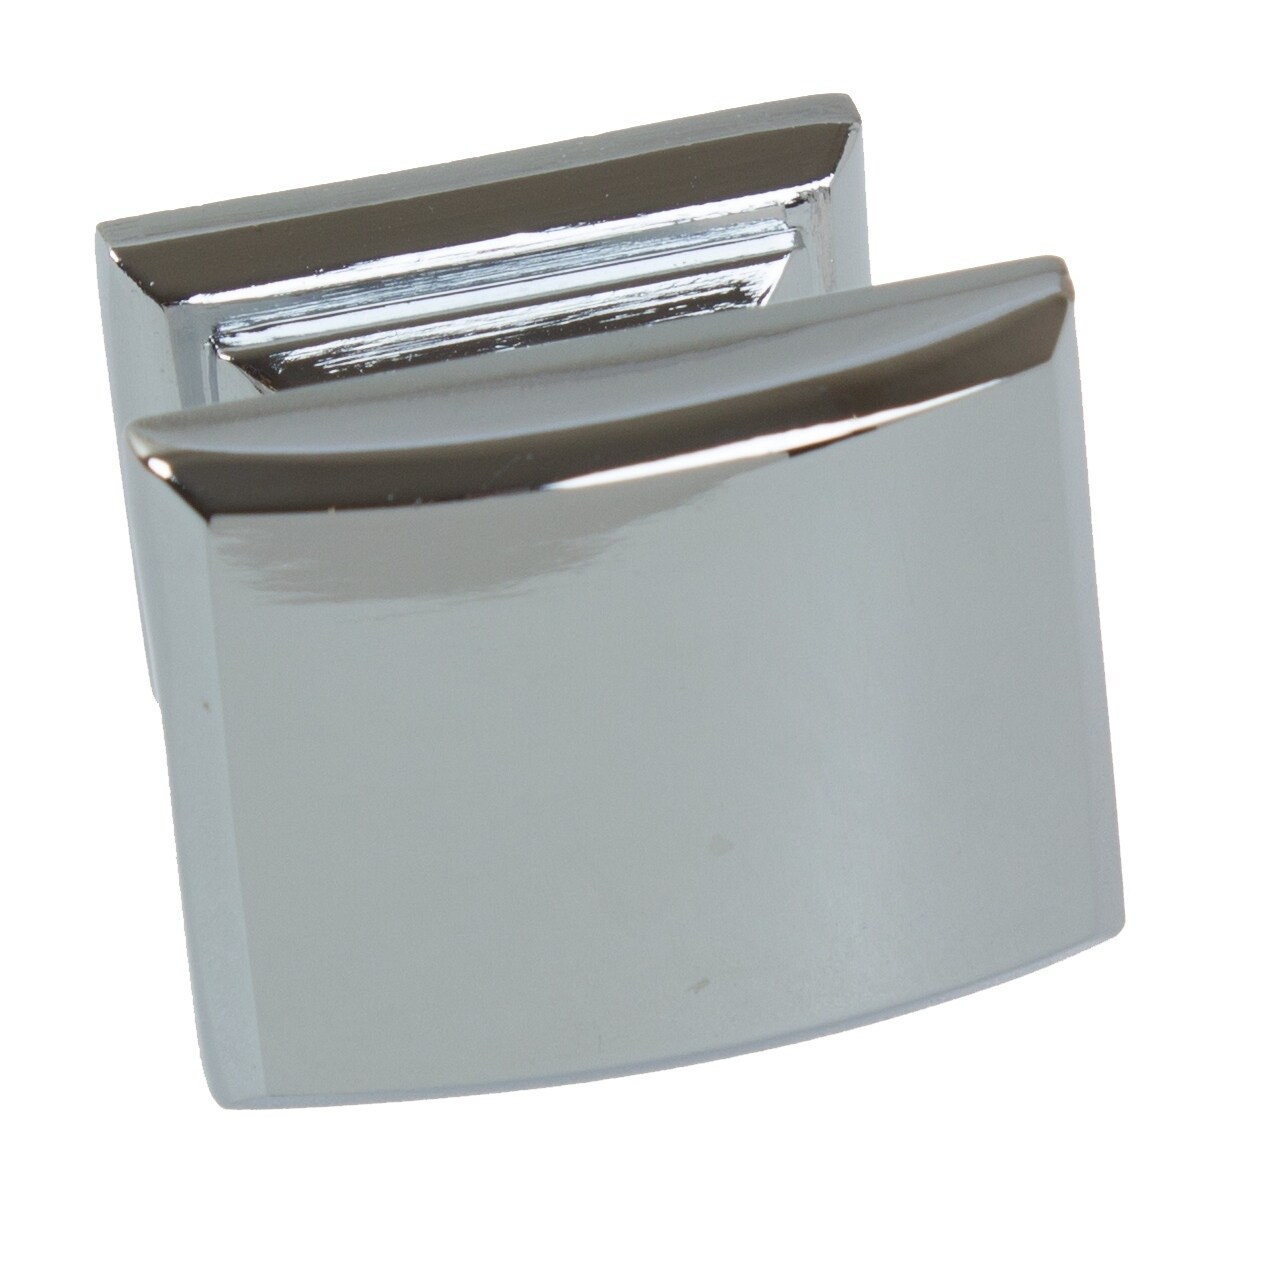 GlideRite 1-1/4 in. Domed Convex Square Cabinet Knob, Polished Chrome, Pack of 5 - image 3 of 4